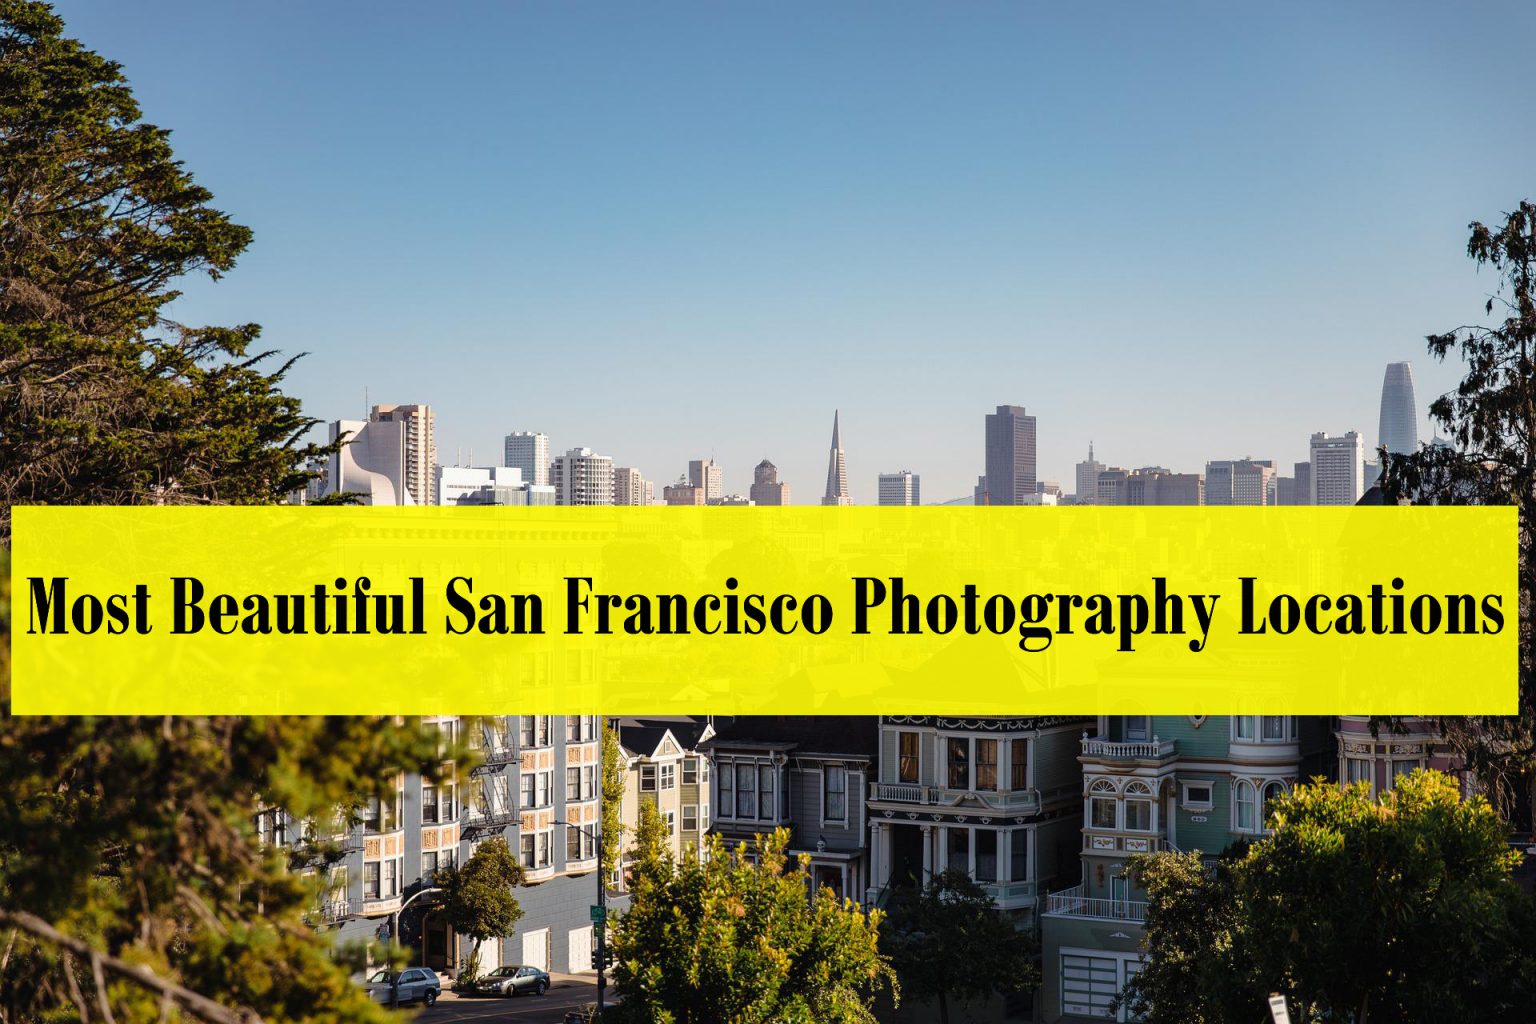 The Most Beautiful San Francisco Photography Locations - secret photography spots in san francisco